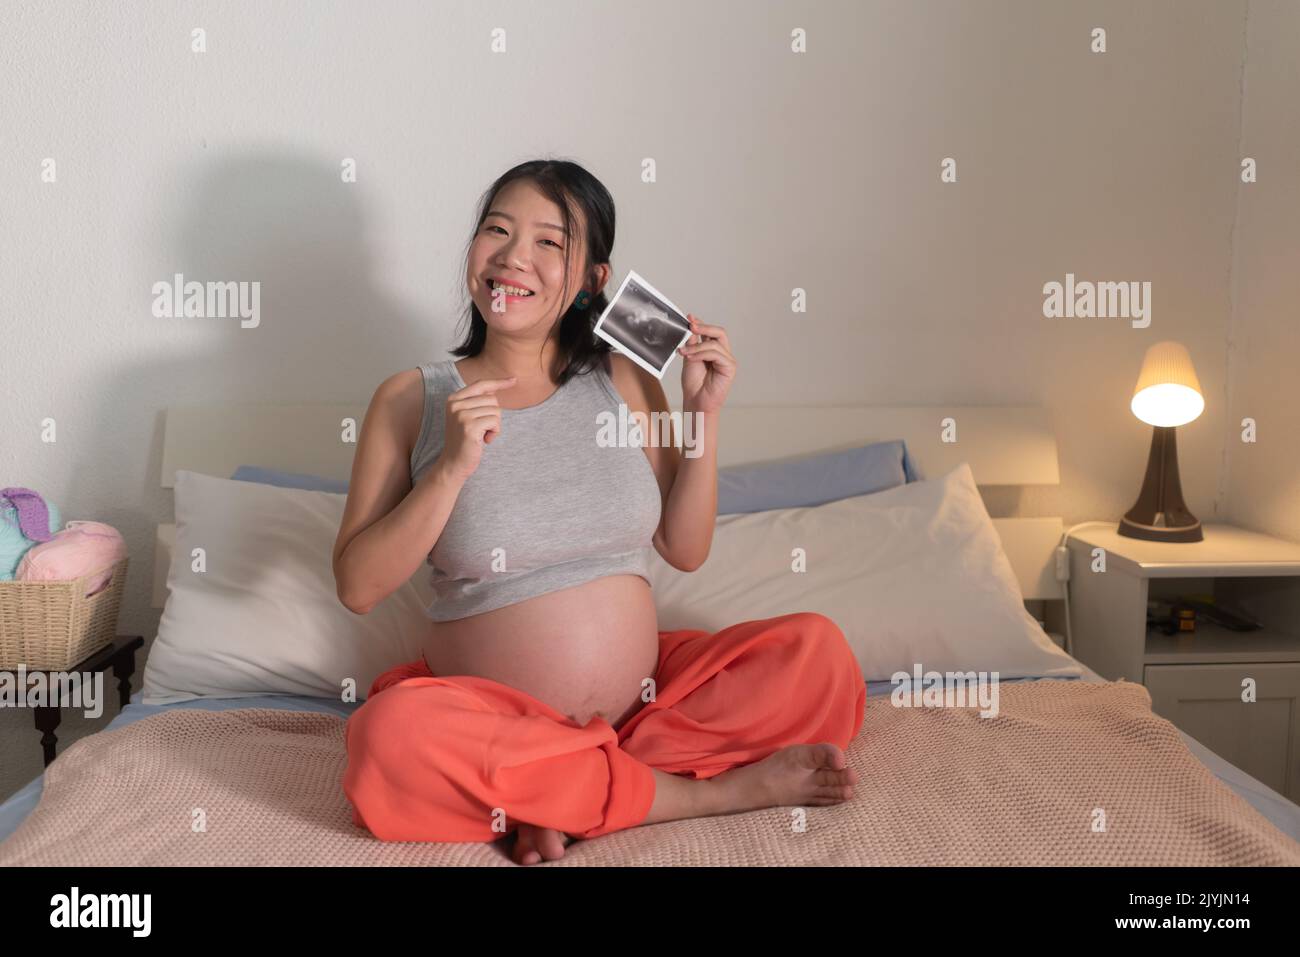 lifestyle home portrait of young happy and beautiful Asian Japanese woman pregnant sitting on bed holding ultrasound photo excited in pregnancy and ma Stock Photo